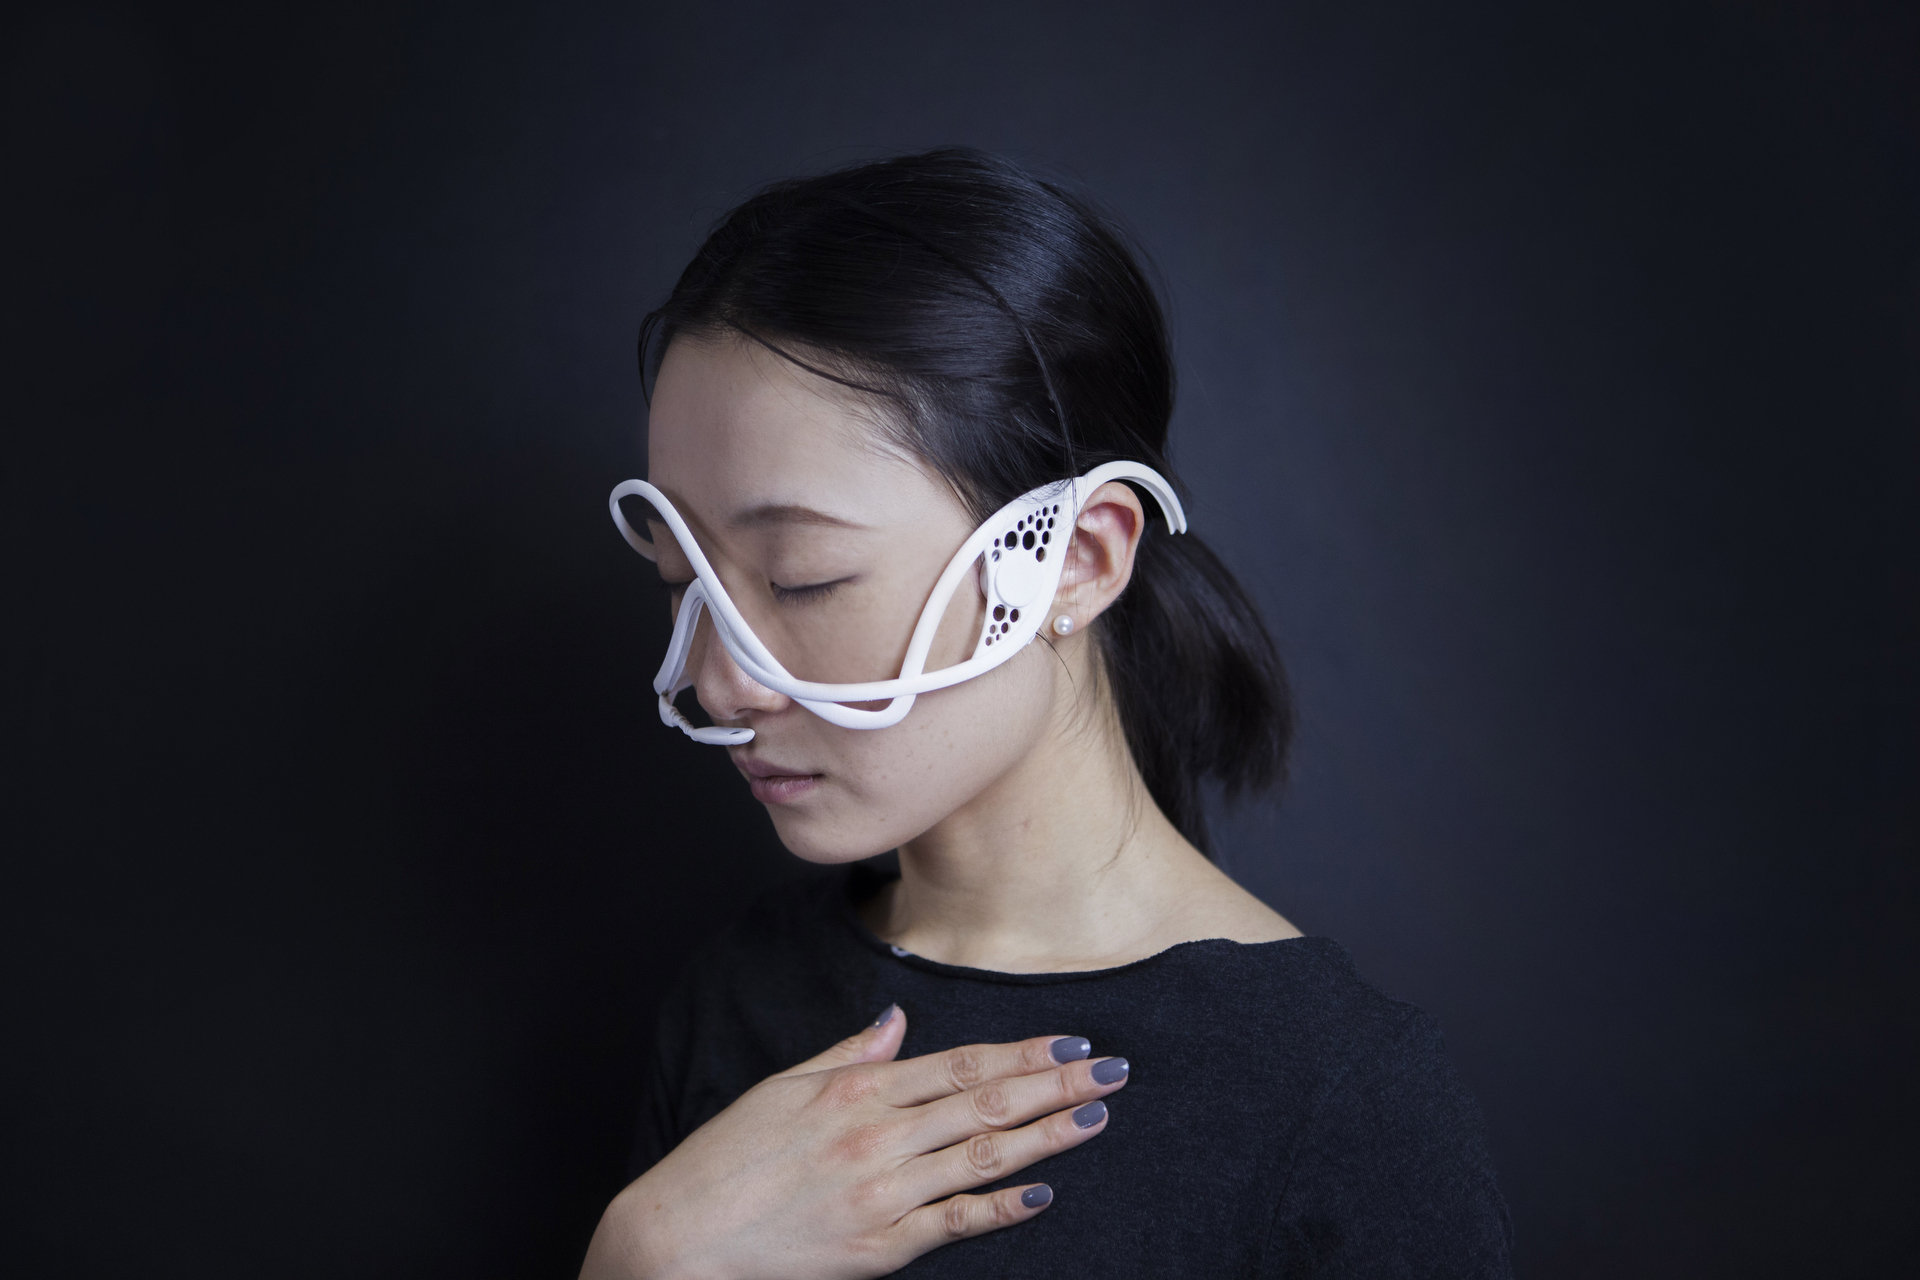 MIT's Masque Wearable Stimulates Sexual Arousal and Anxiety | Digital ...